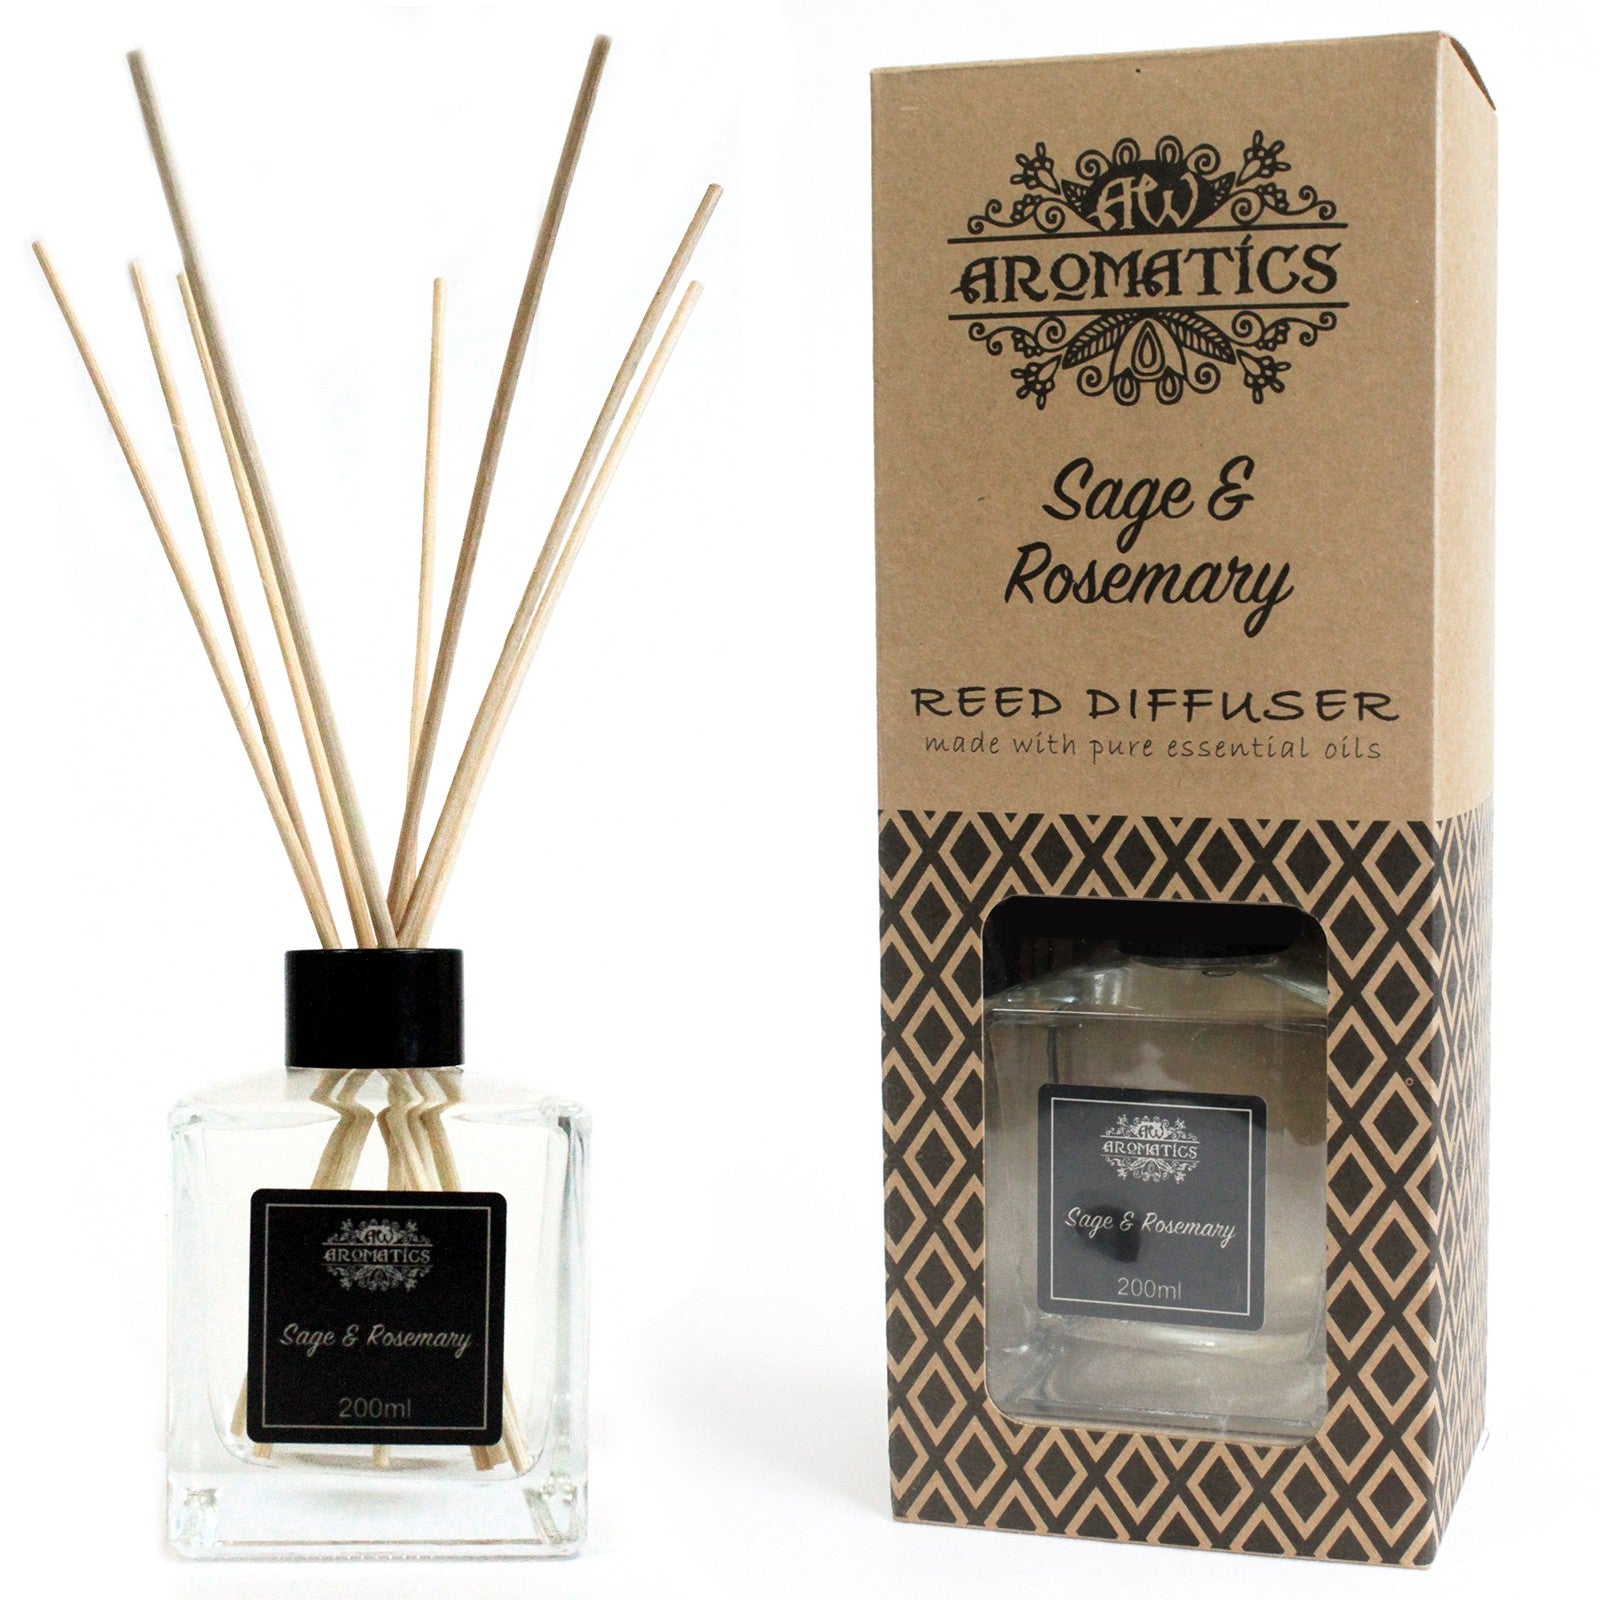 200ml Sage & Rosemary Essential Oil Reed Diffuser - £37.0 - 